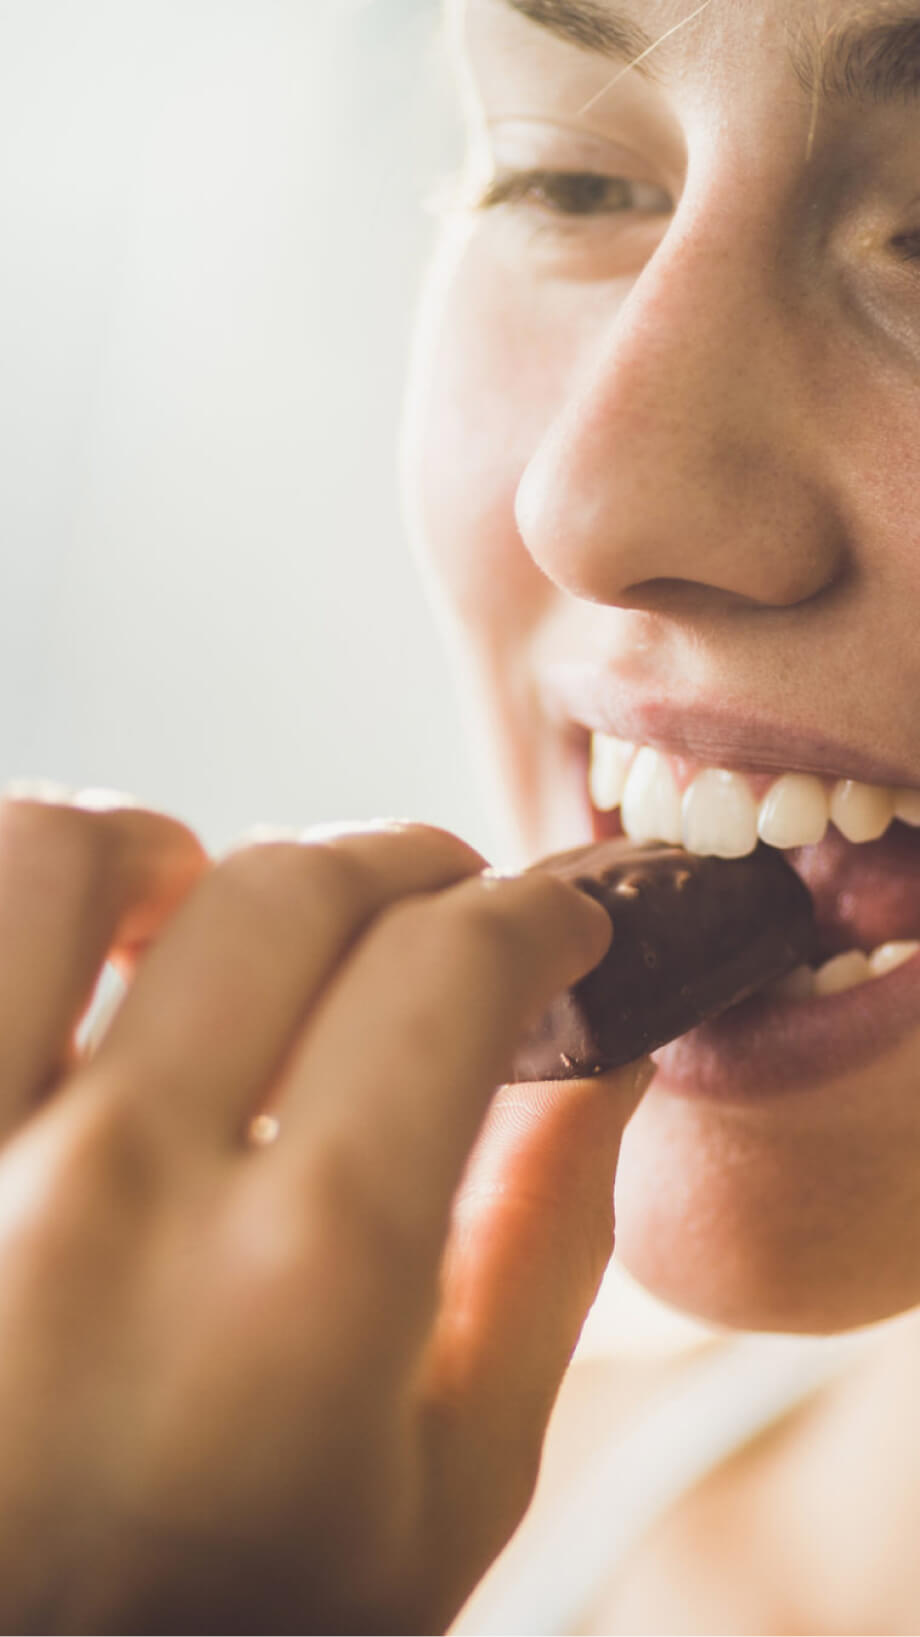 A young woman eats some chocolate